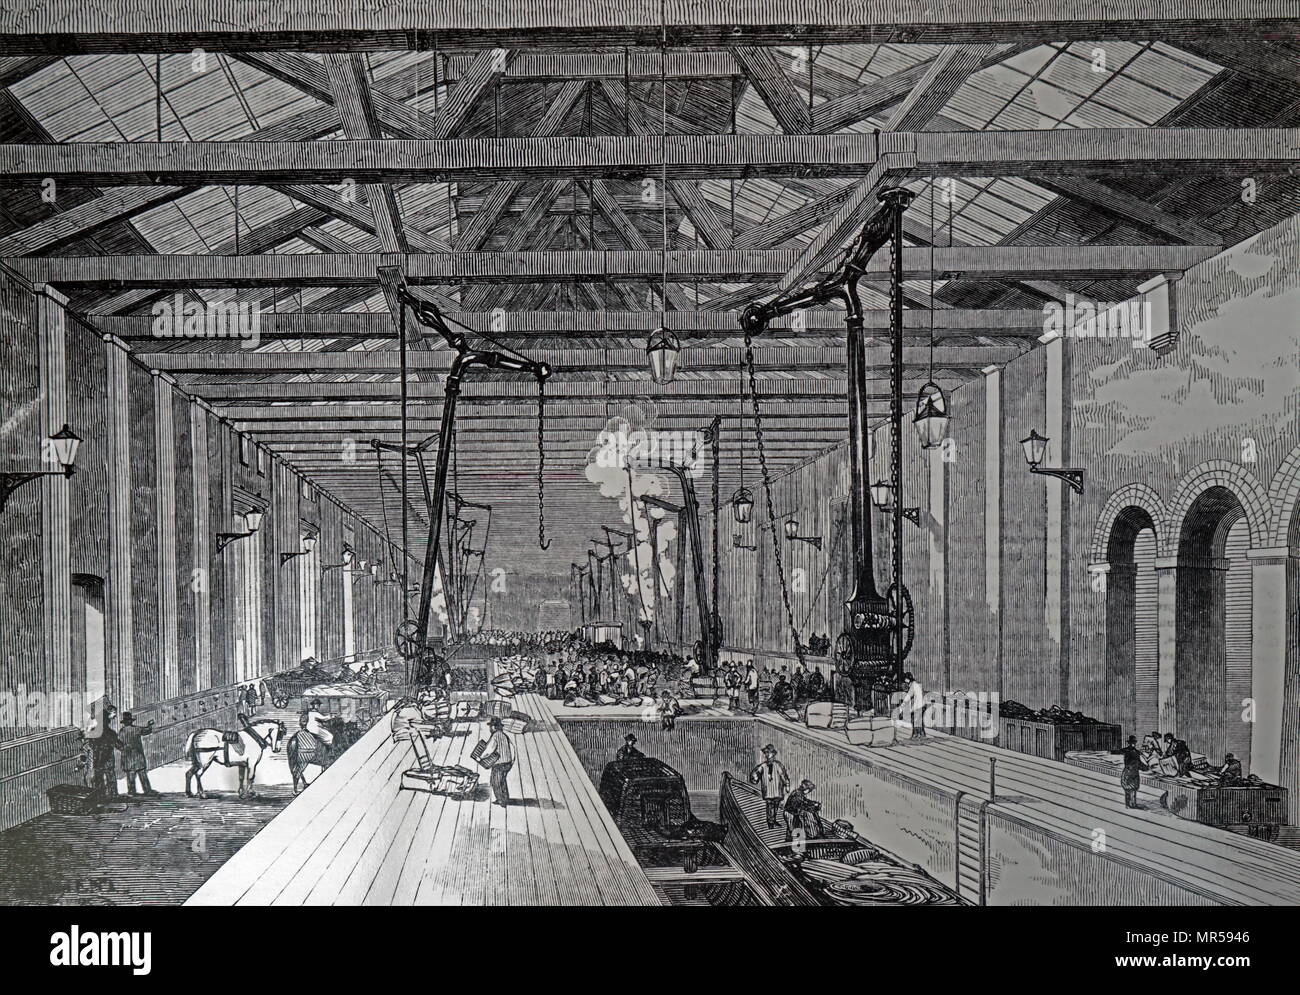 Engraving depicting the Great Northern Railway goods shed at the London terminus, designed by Lewis Cubitt. It connected the railway freight to the Thames at Limehouse by the way of the Regent's Canal. Lewis Cubitt (1799-1883) an English civil engineer. Dated 19th century Stock Photo